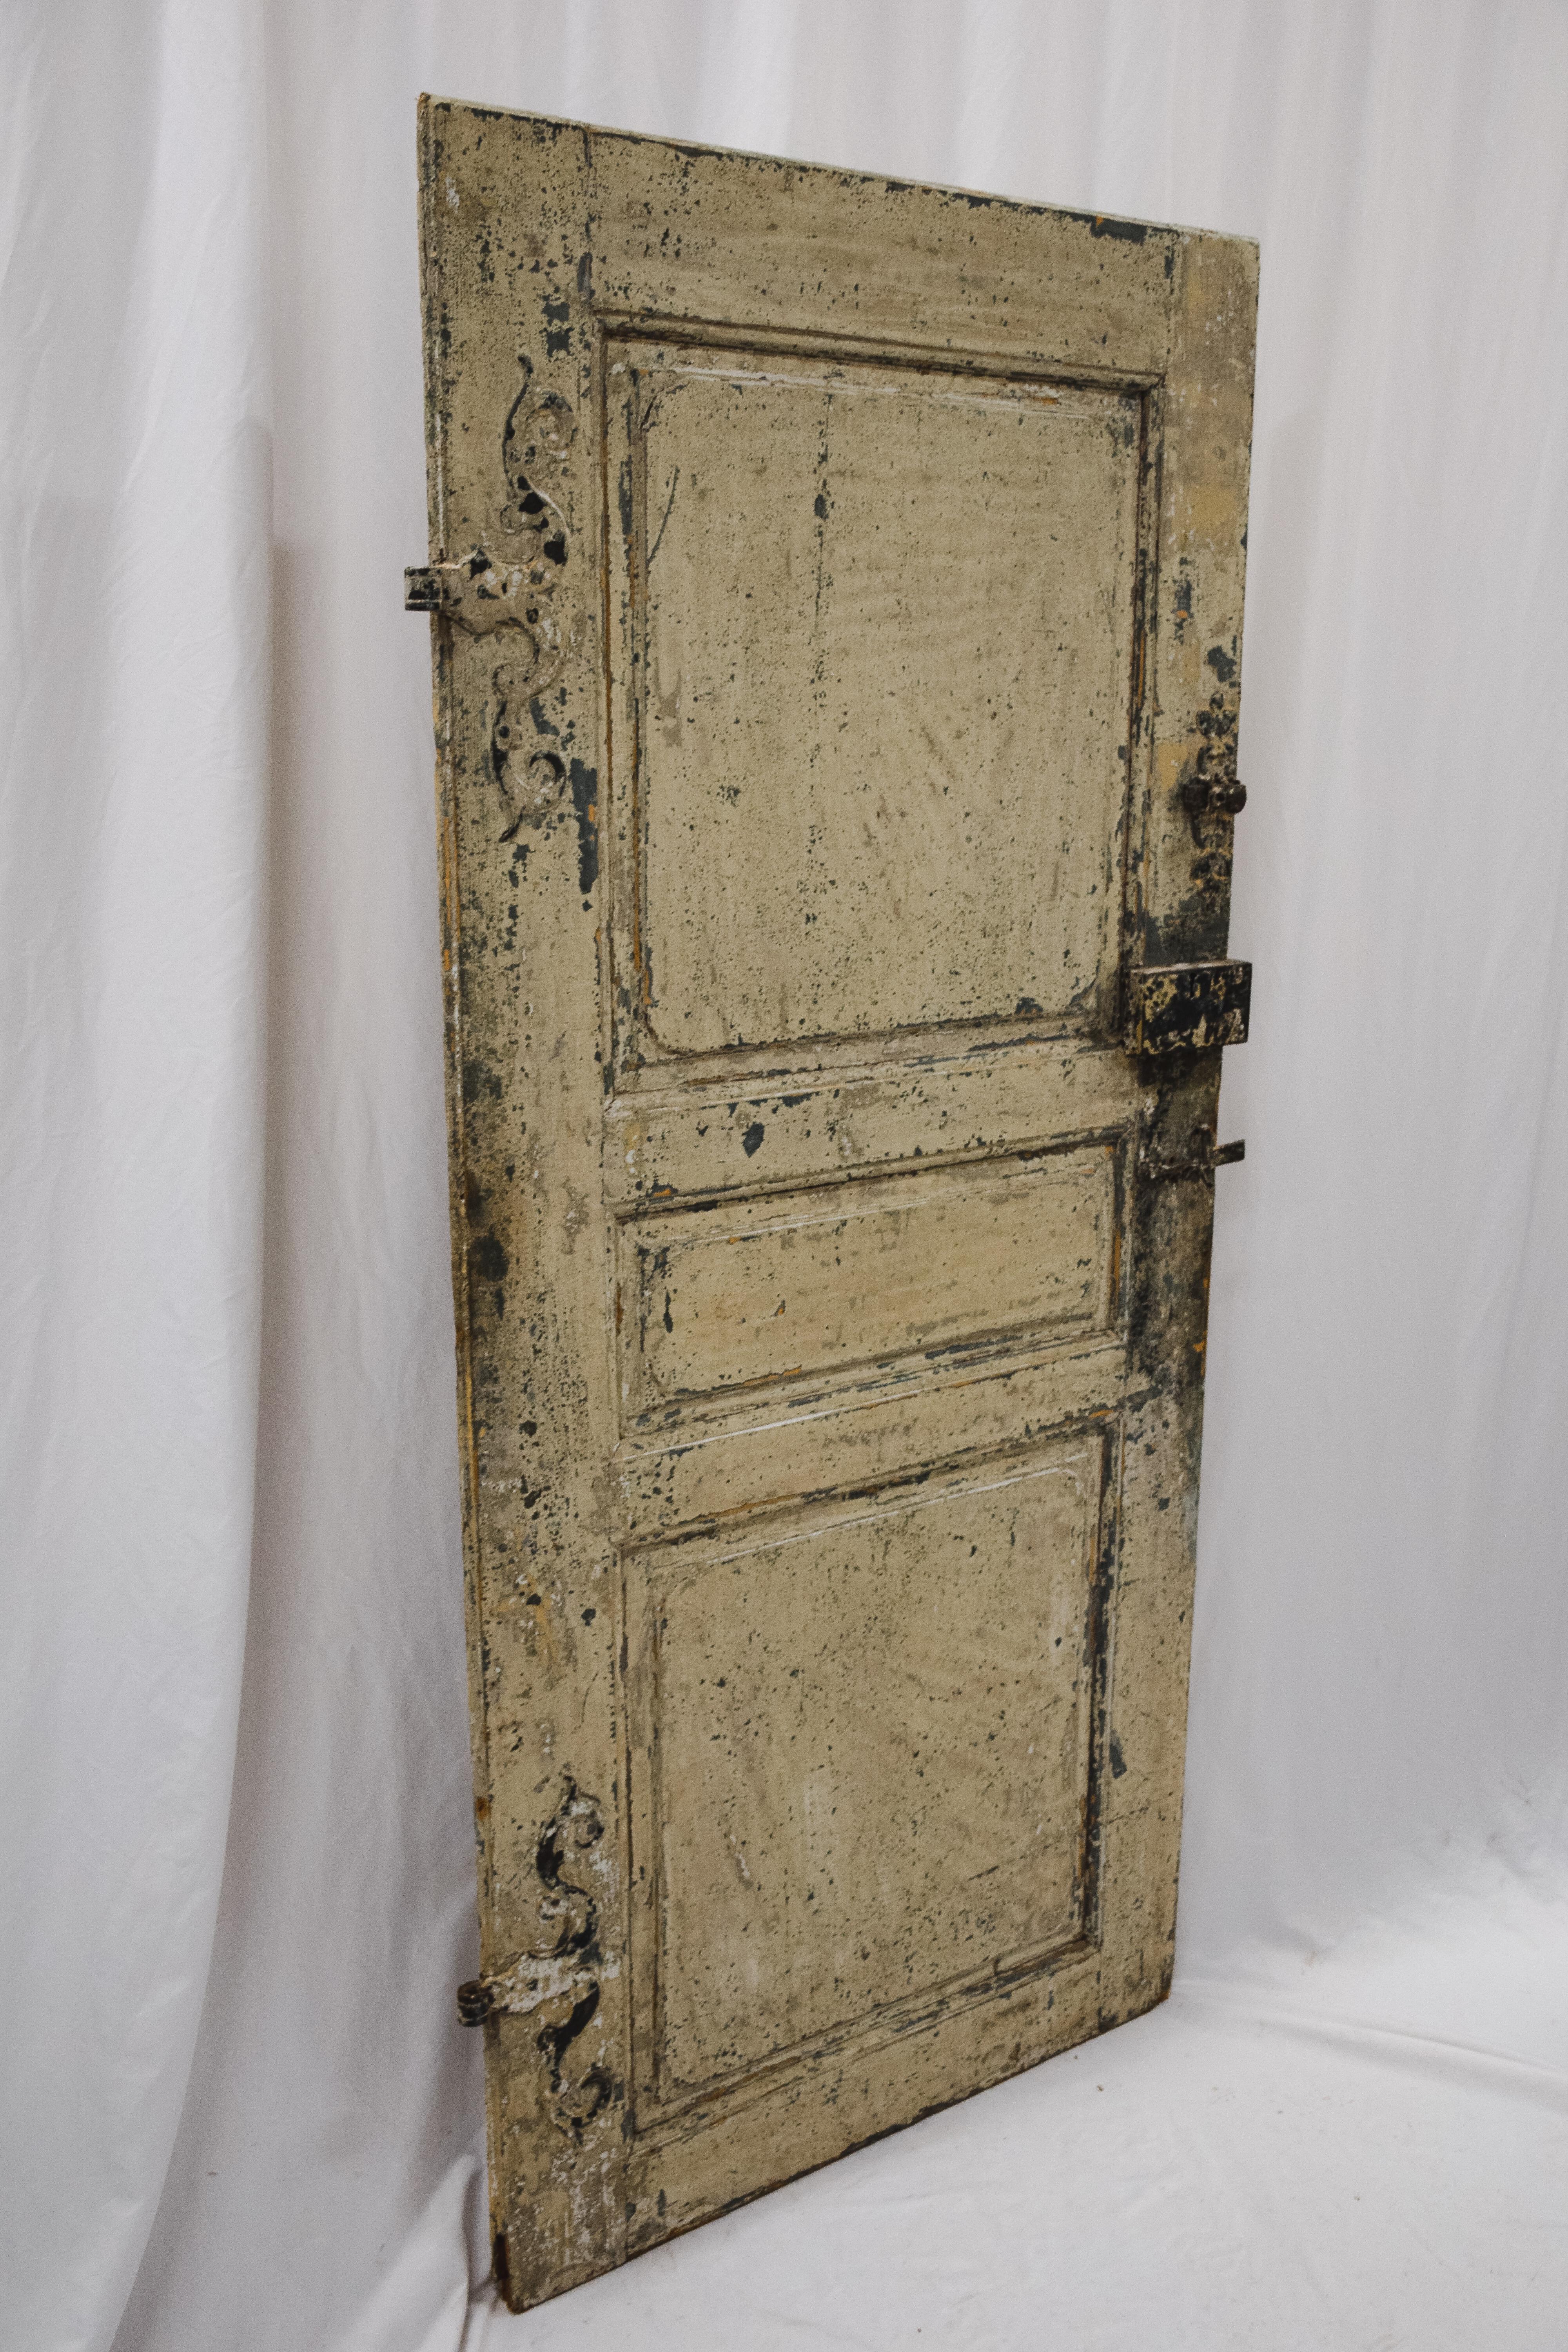 Beautiful Antique French painted door from the 1800's, sourced from France. It is adorned with detailed iron hardware and is fully functional with some general wear to wood and paint. Would be a great pantry, closet, or office door to enhance any